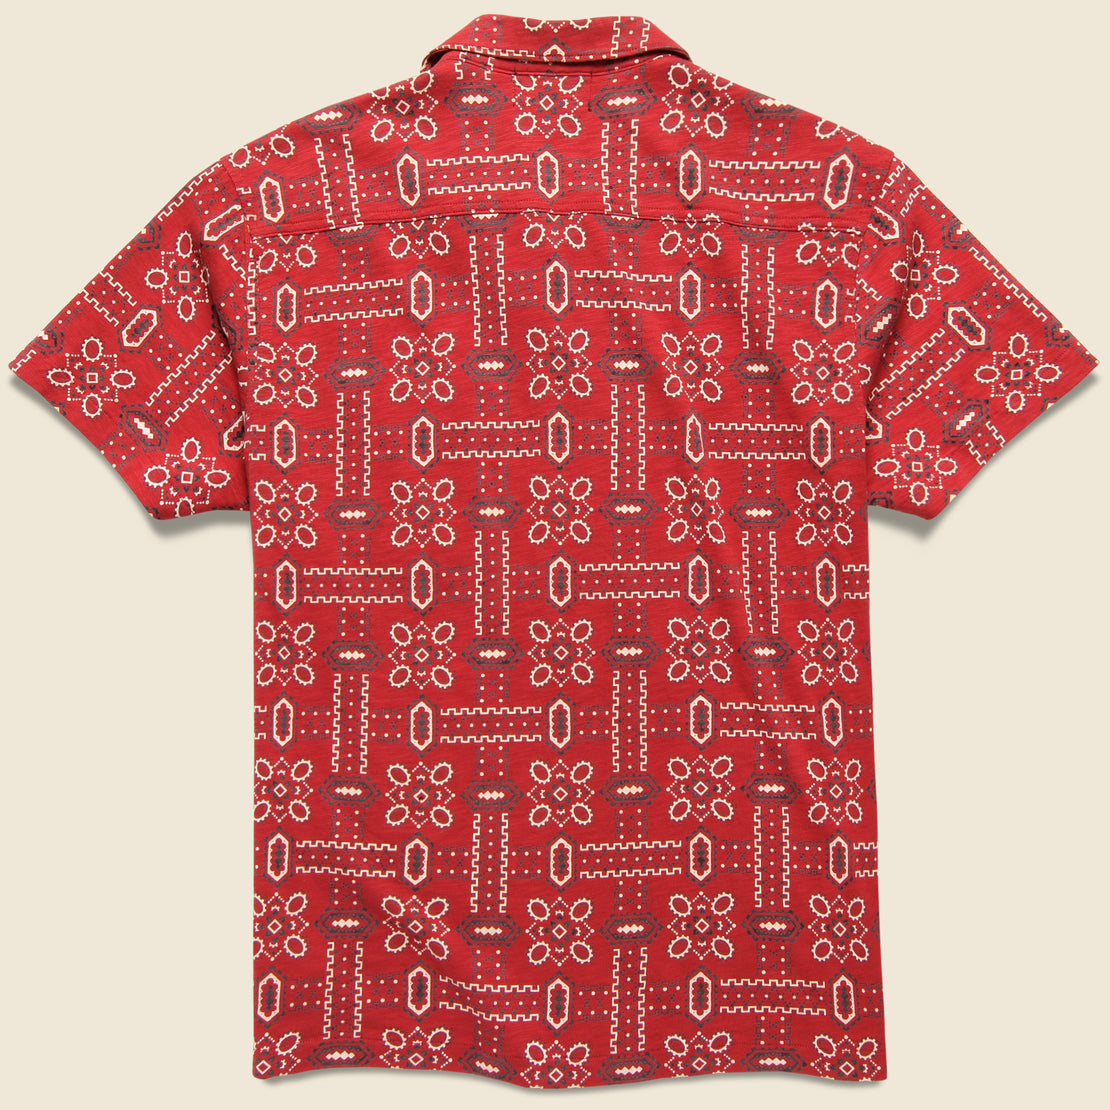 Bandana Print Knit Camp Shirt - Red/Multi - RRL - STAG Provisions - Tops - S/S Woven - Other Pattern